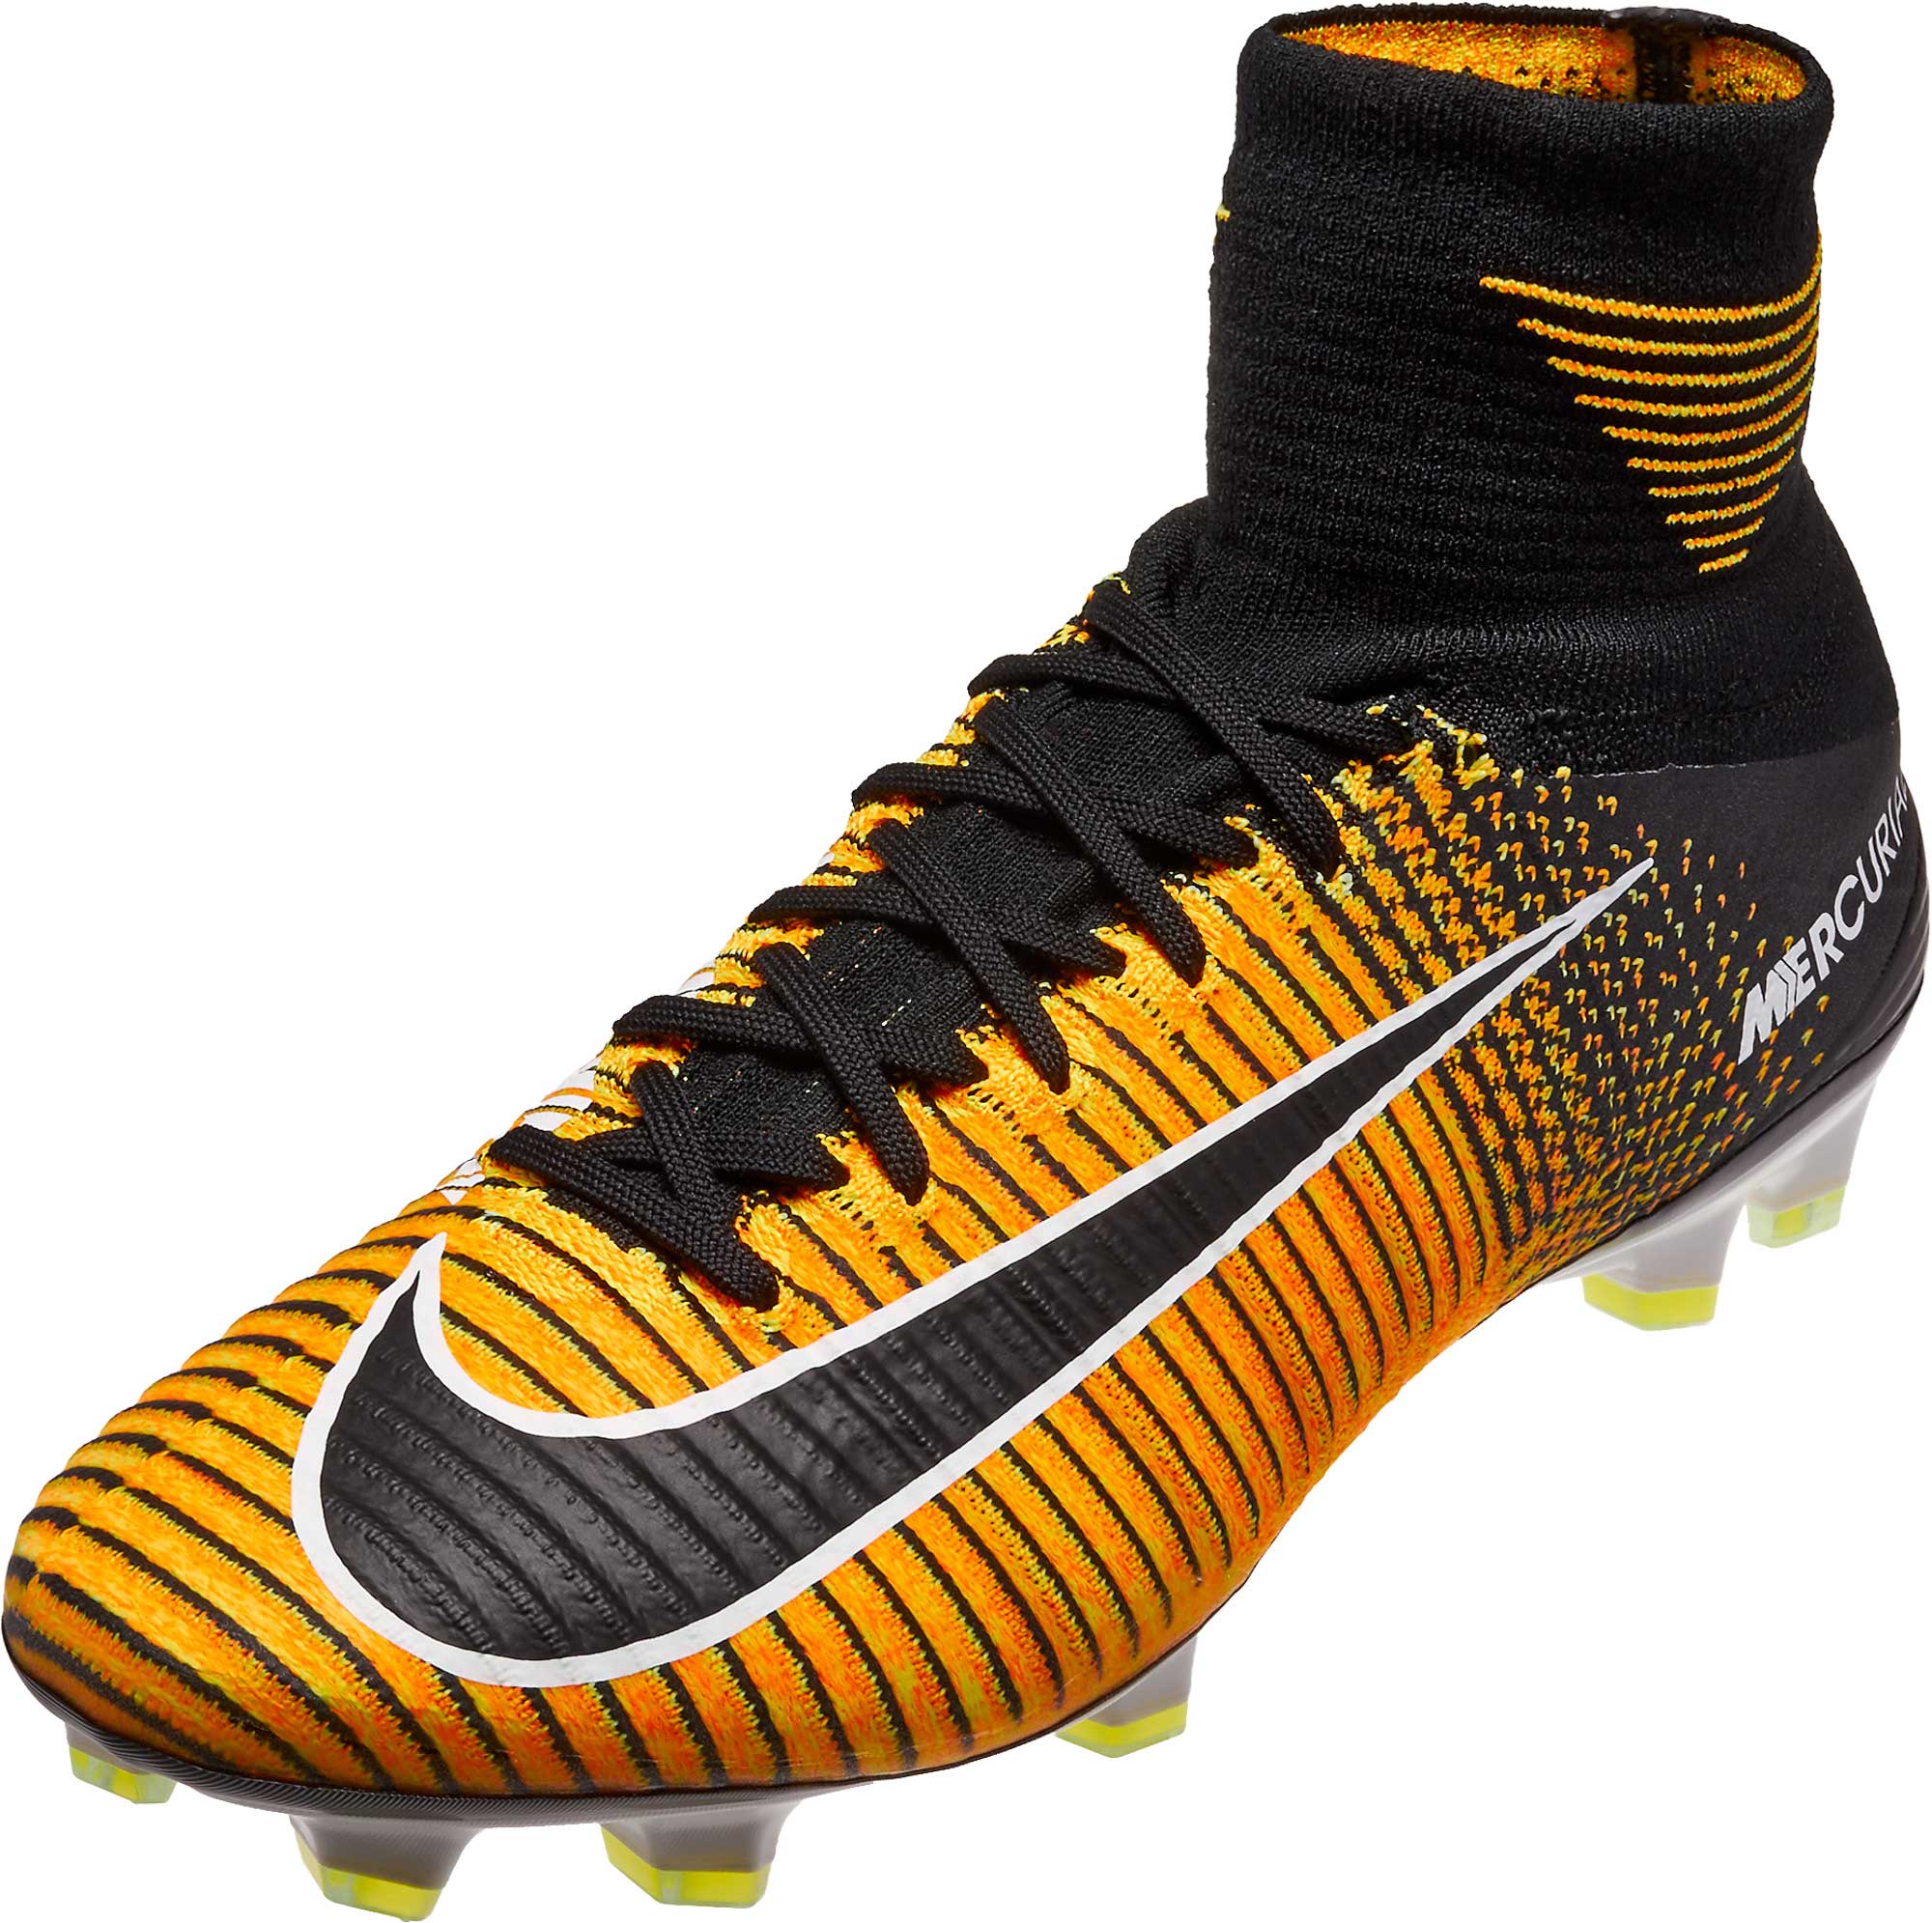 yellow and black mercurials